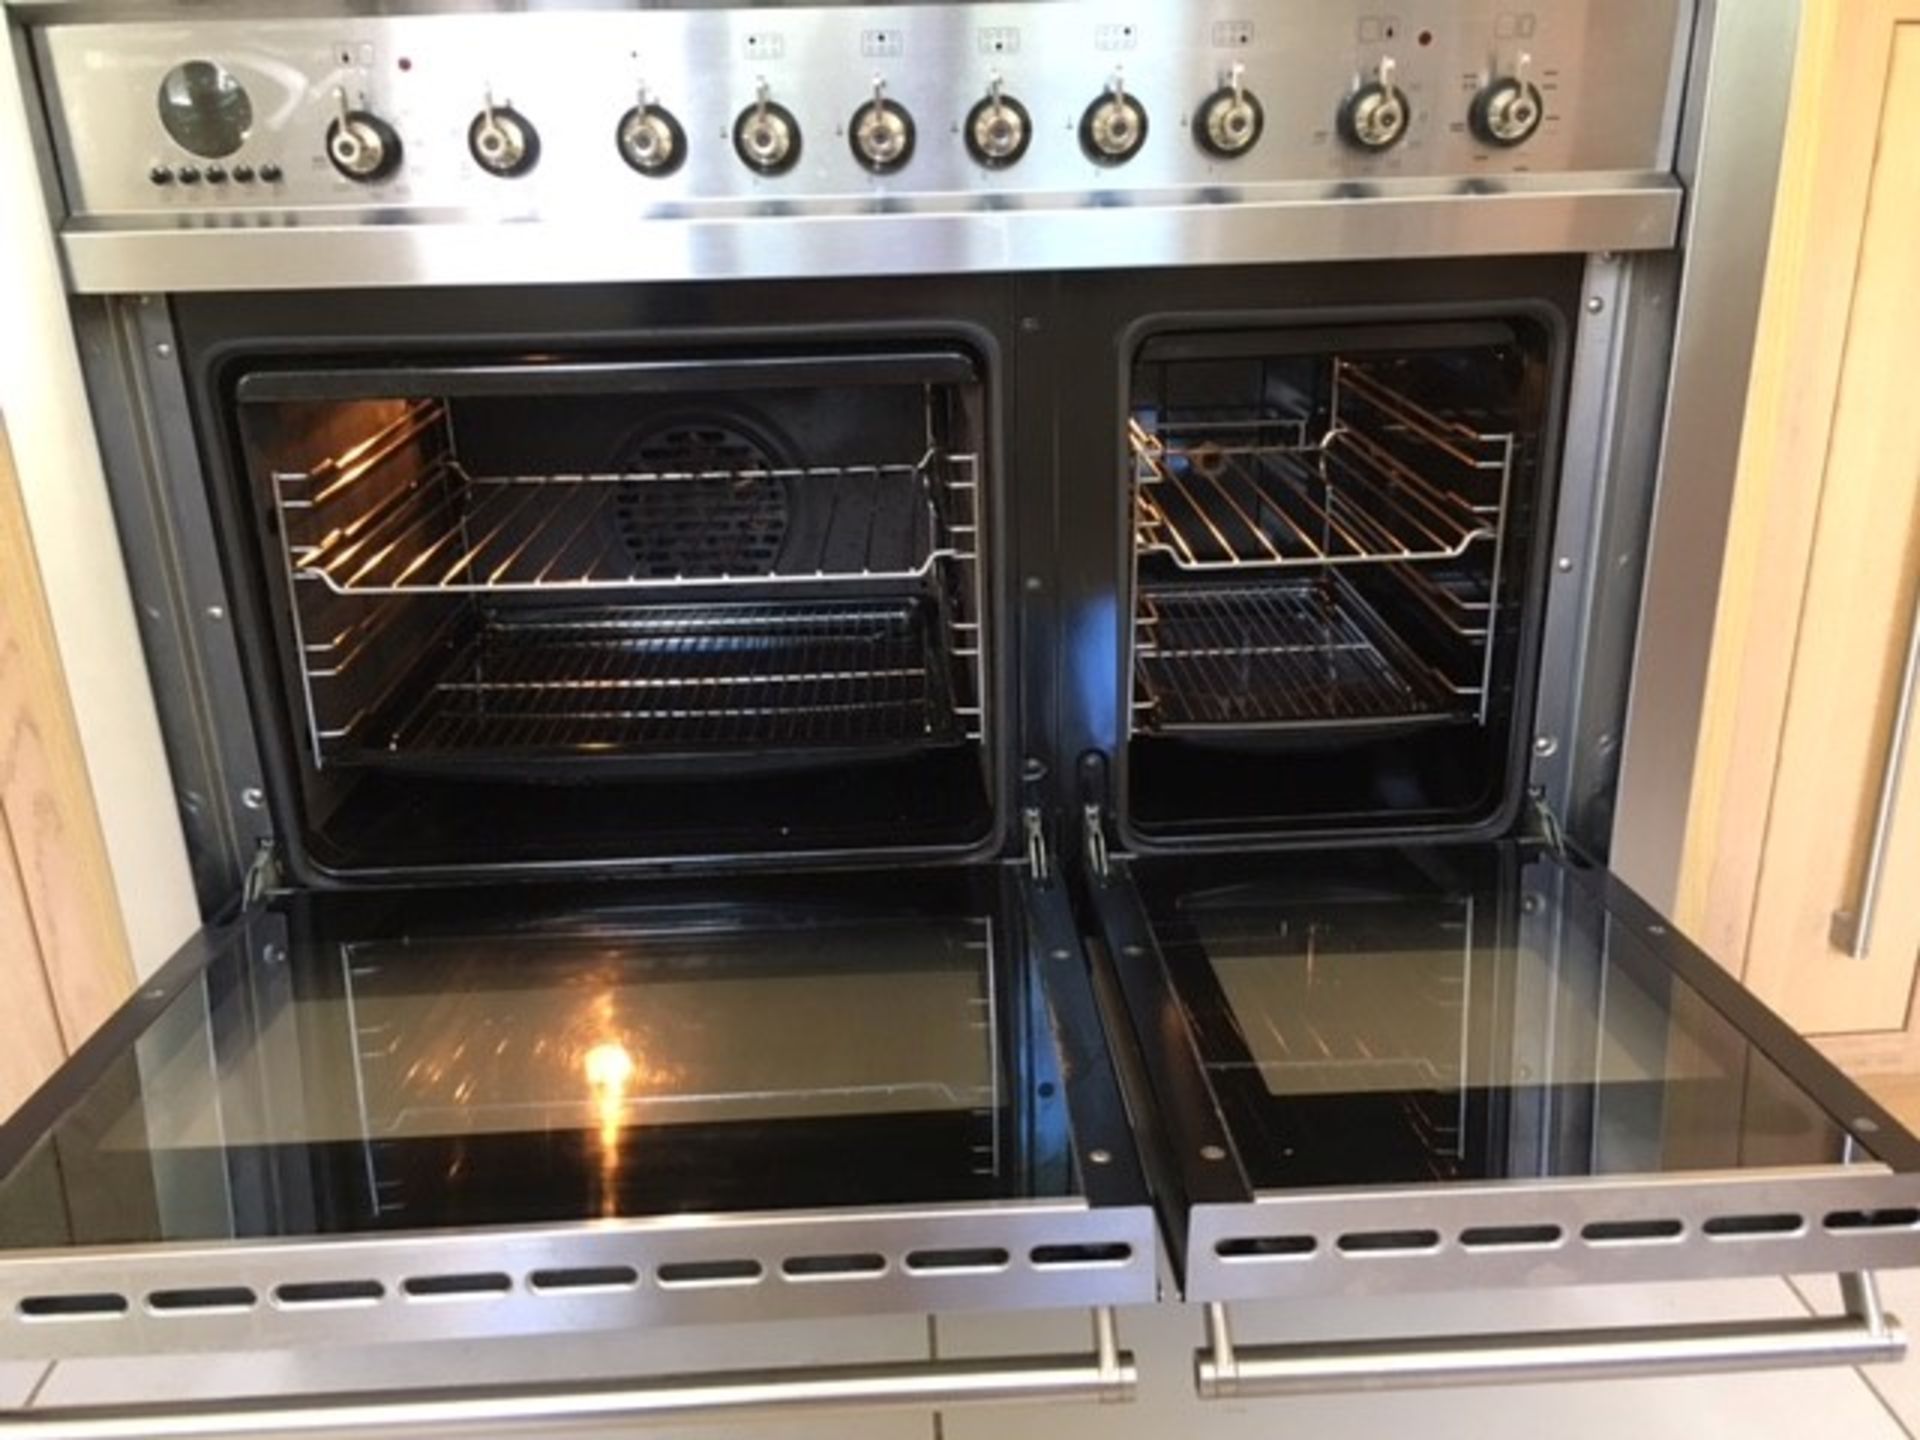 1 x Smeg Stainless Steel A2-5 Dual Fuel 6 Burner Cooker With Smeg Extractor, and Splashback - - Image 8 of 14